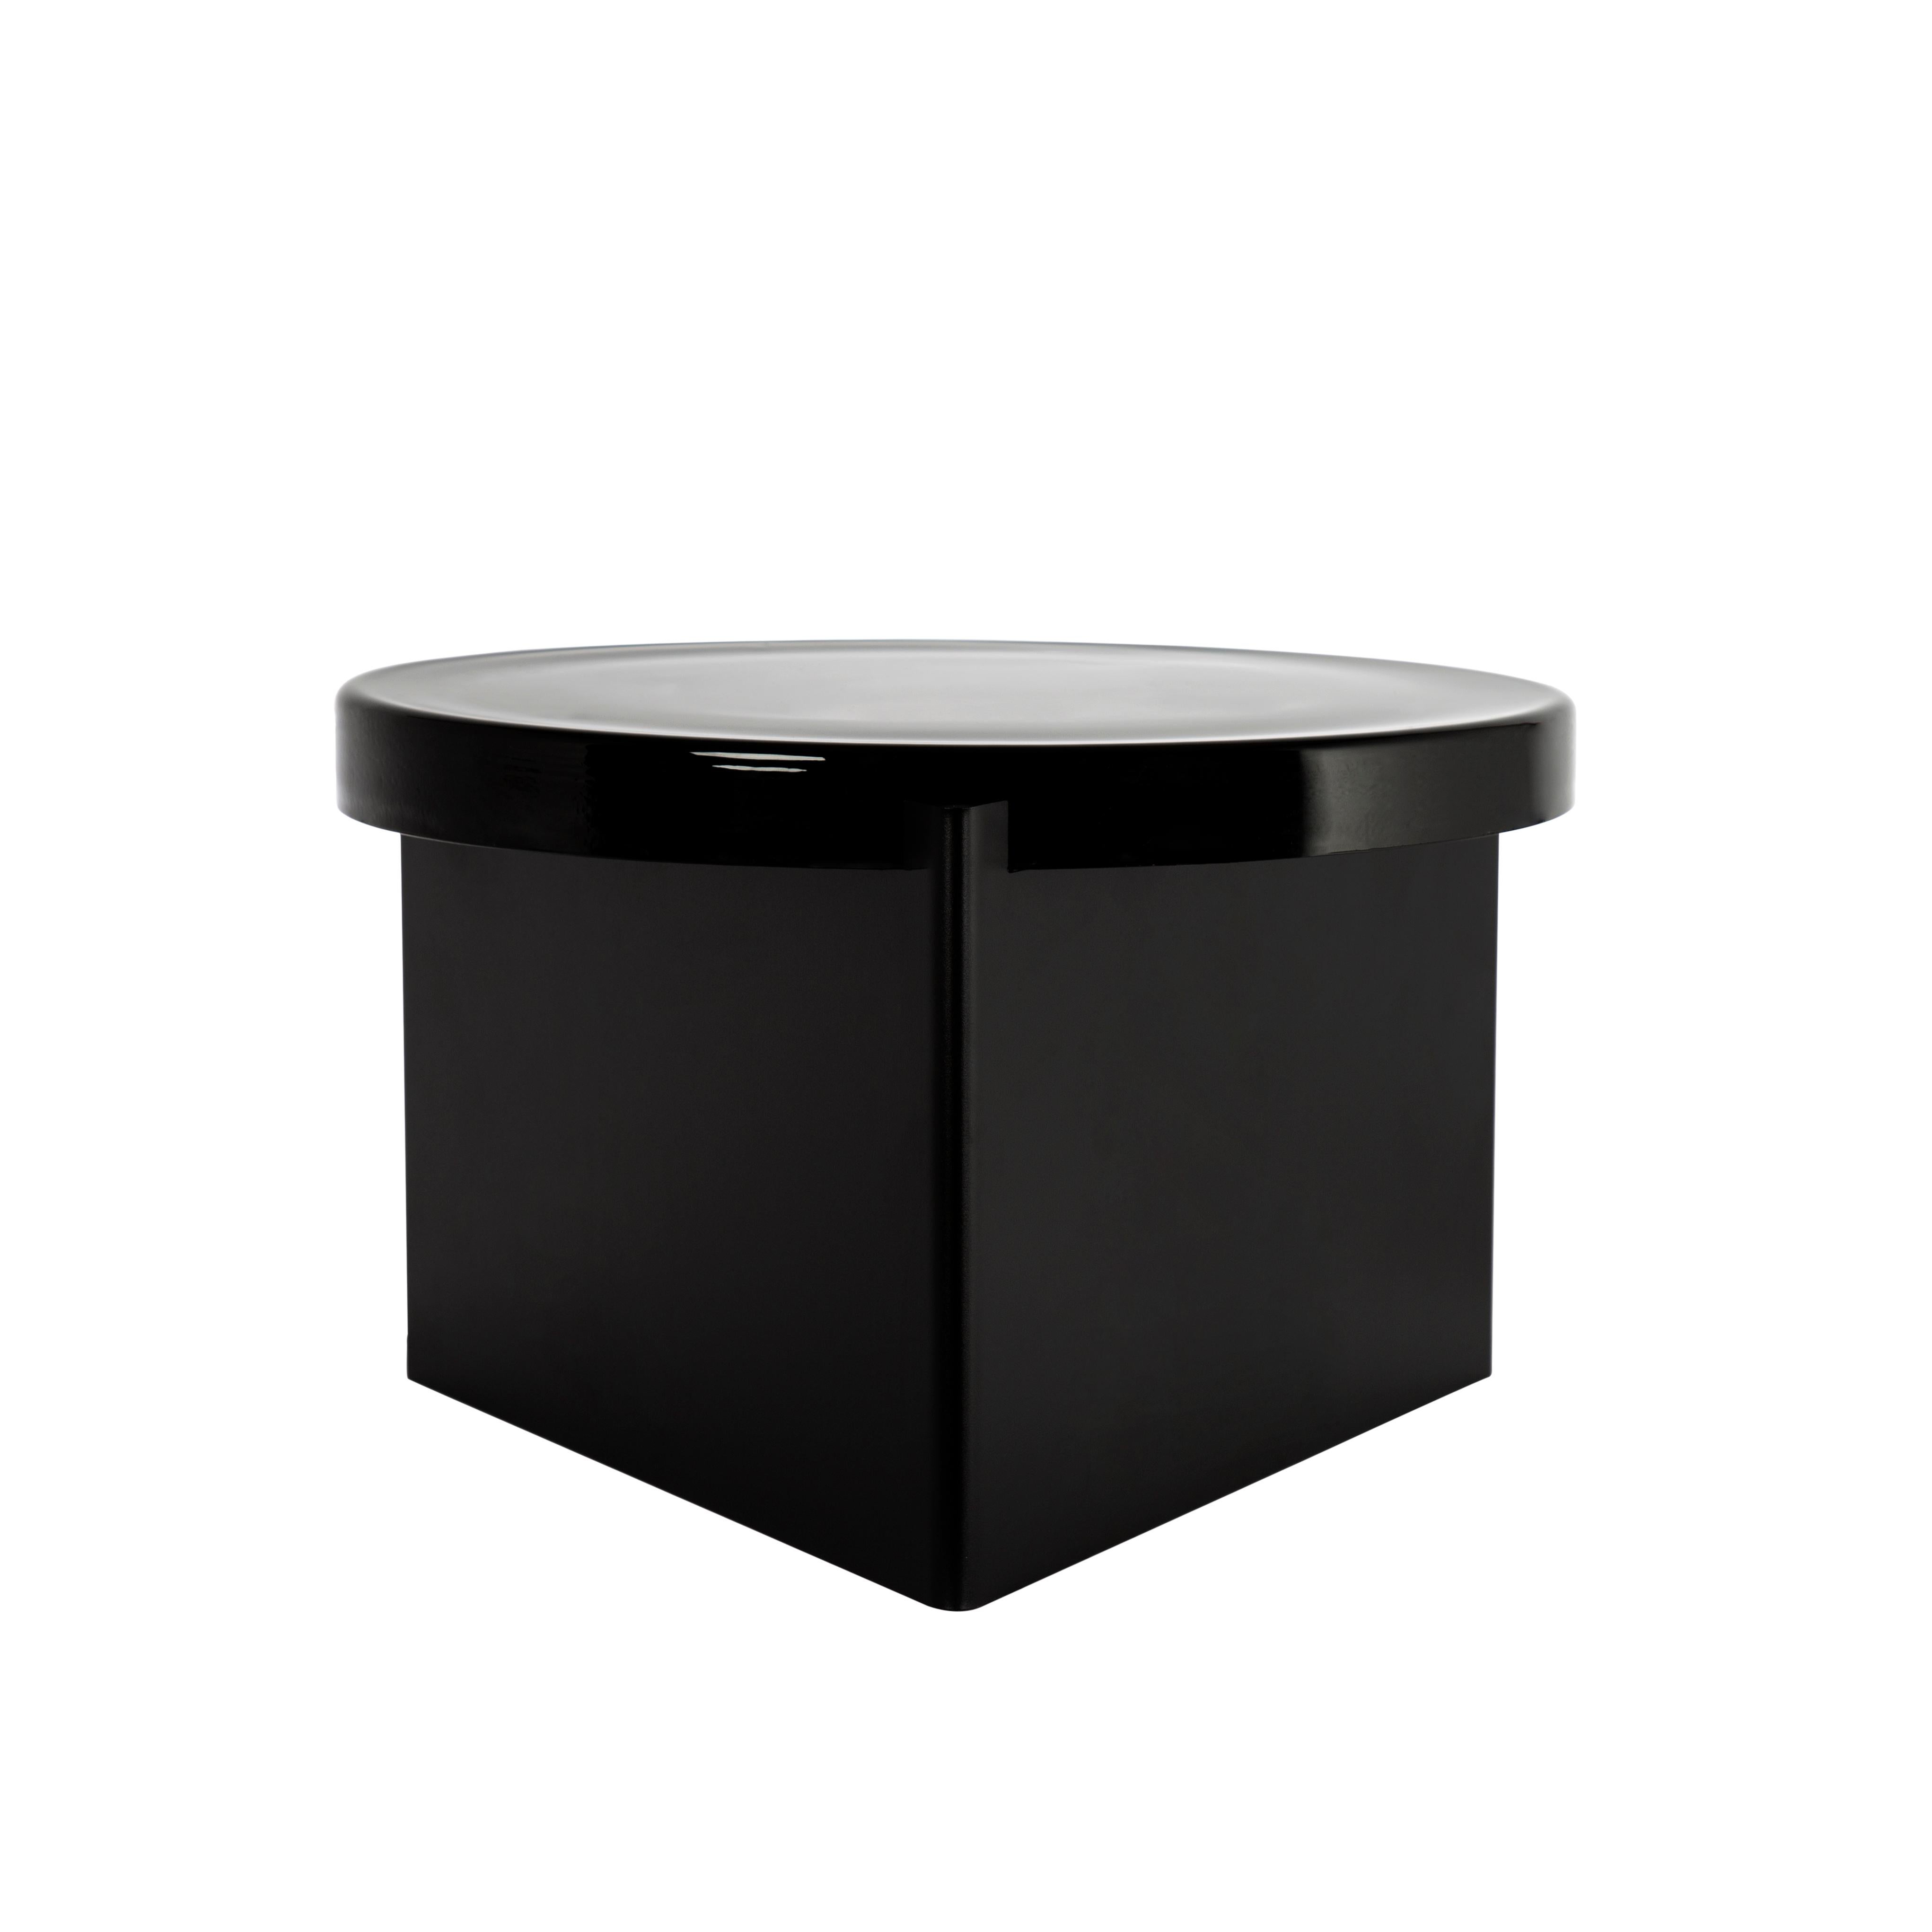 Alwa one big black coffee table by Pulpo
Dimensions: D56 x H35 cm
Materials: casted glass; powder coated steel 

Also available in different finishes. 

Normally, glass is regarded as being lightweight with sharp edges. In contrast, Sebastian